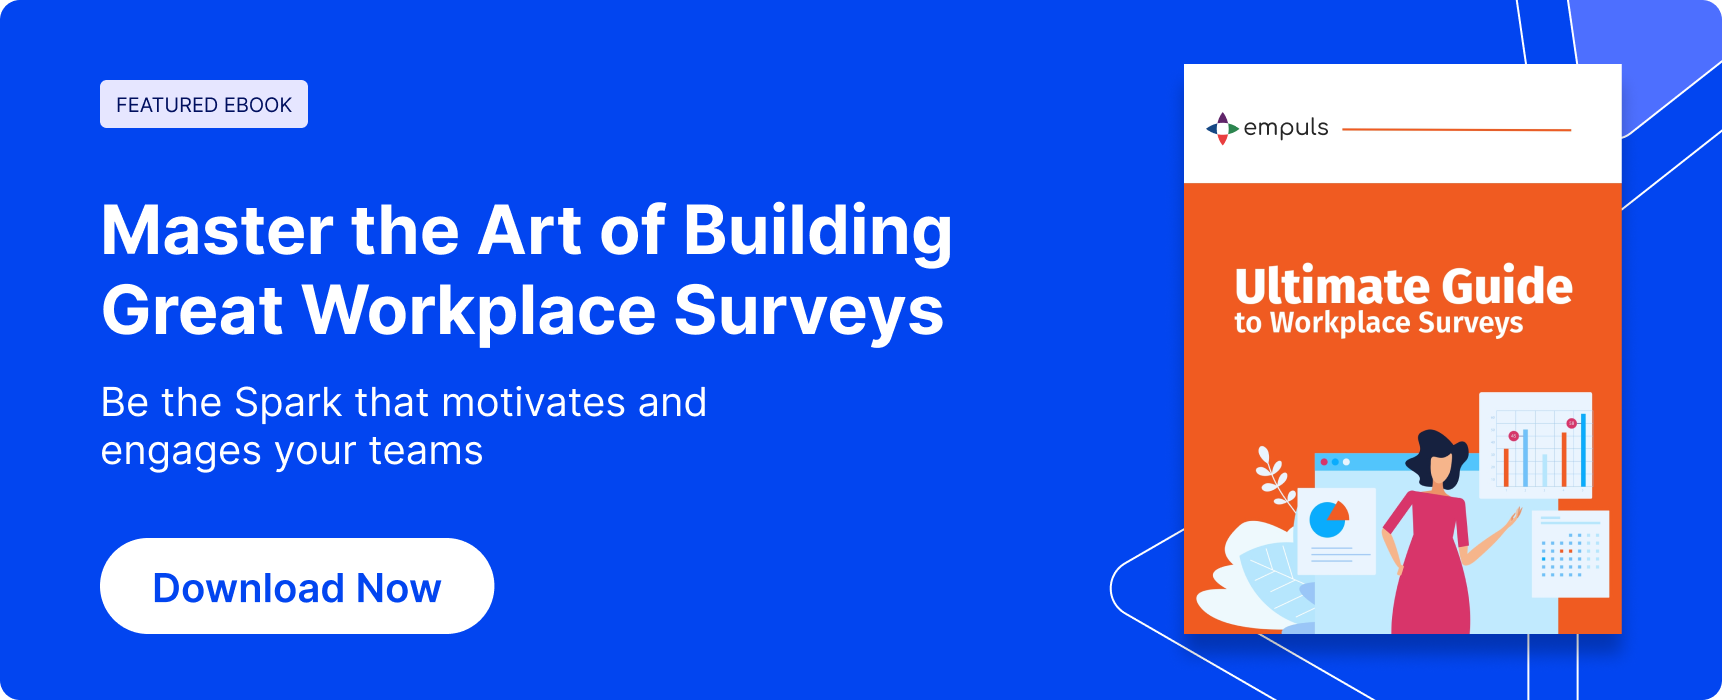 The Ultimate Guide to Workplace Surveys